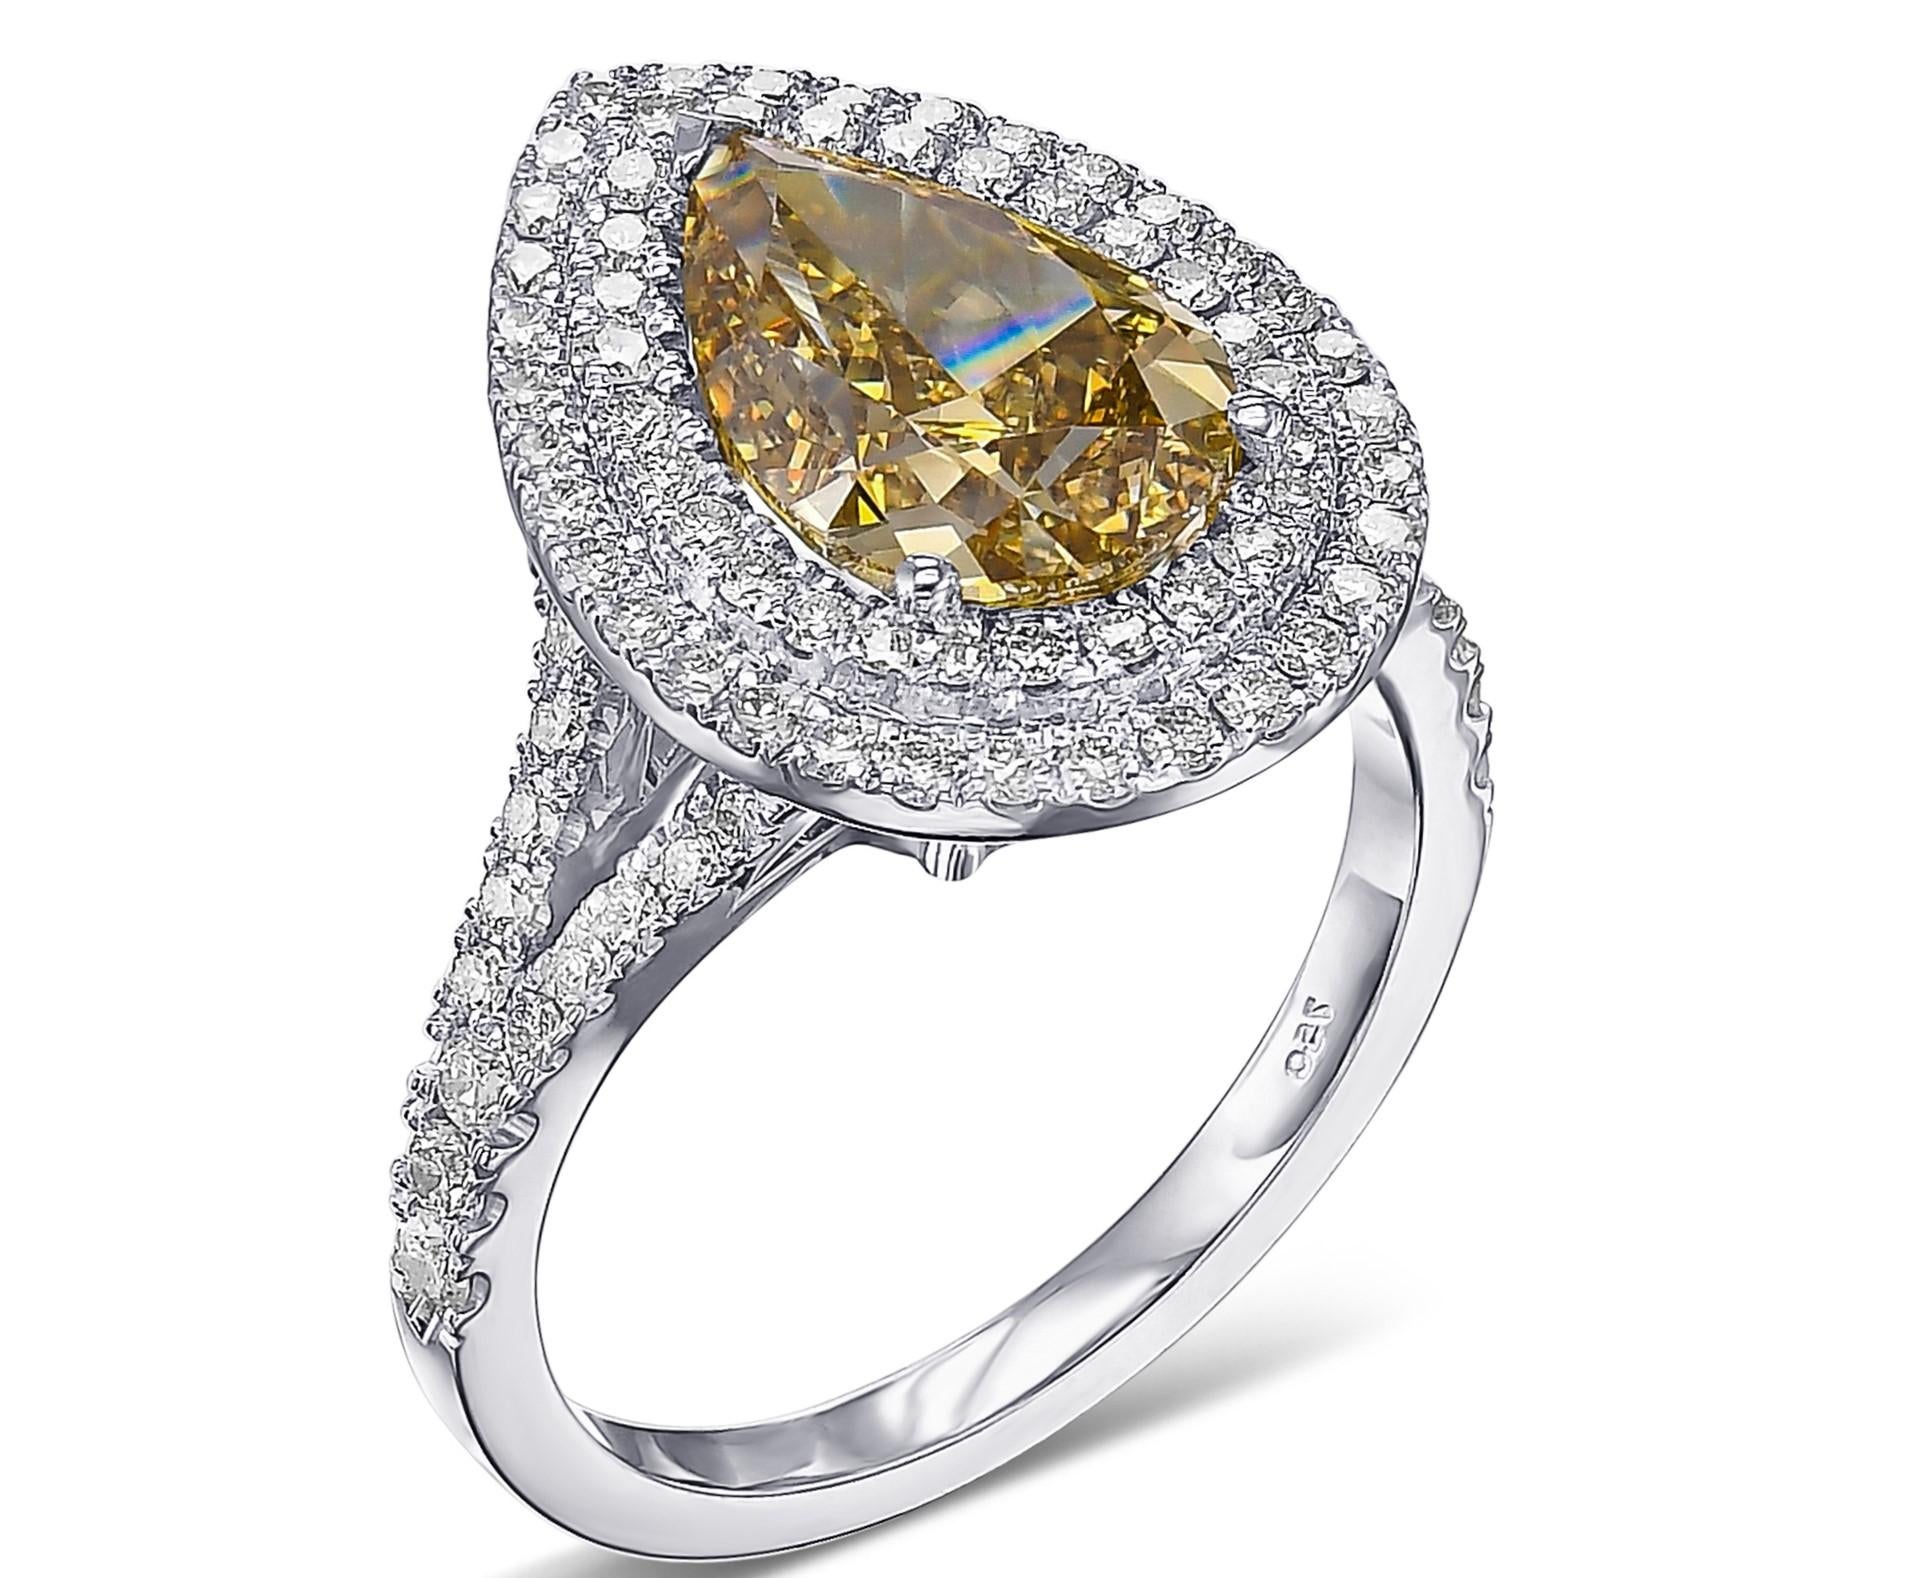 Today we are offering this amazing ring featuring a center 3.21 carat fancy deep brownish greenish yellow pear shape diamond diamonds halo ring. 

A once in a lifetime opportunity to become the proud owner of this amazing ring. The ring has